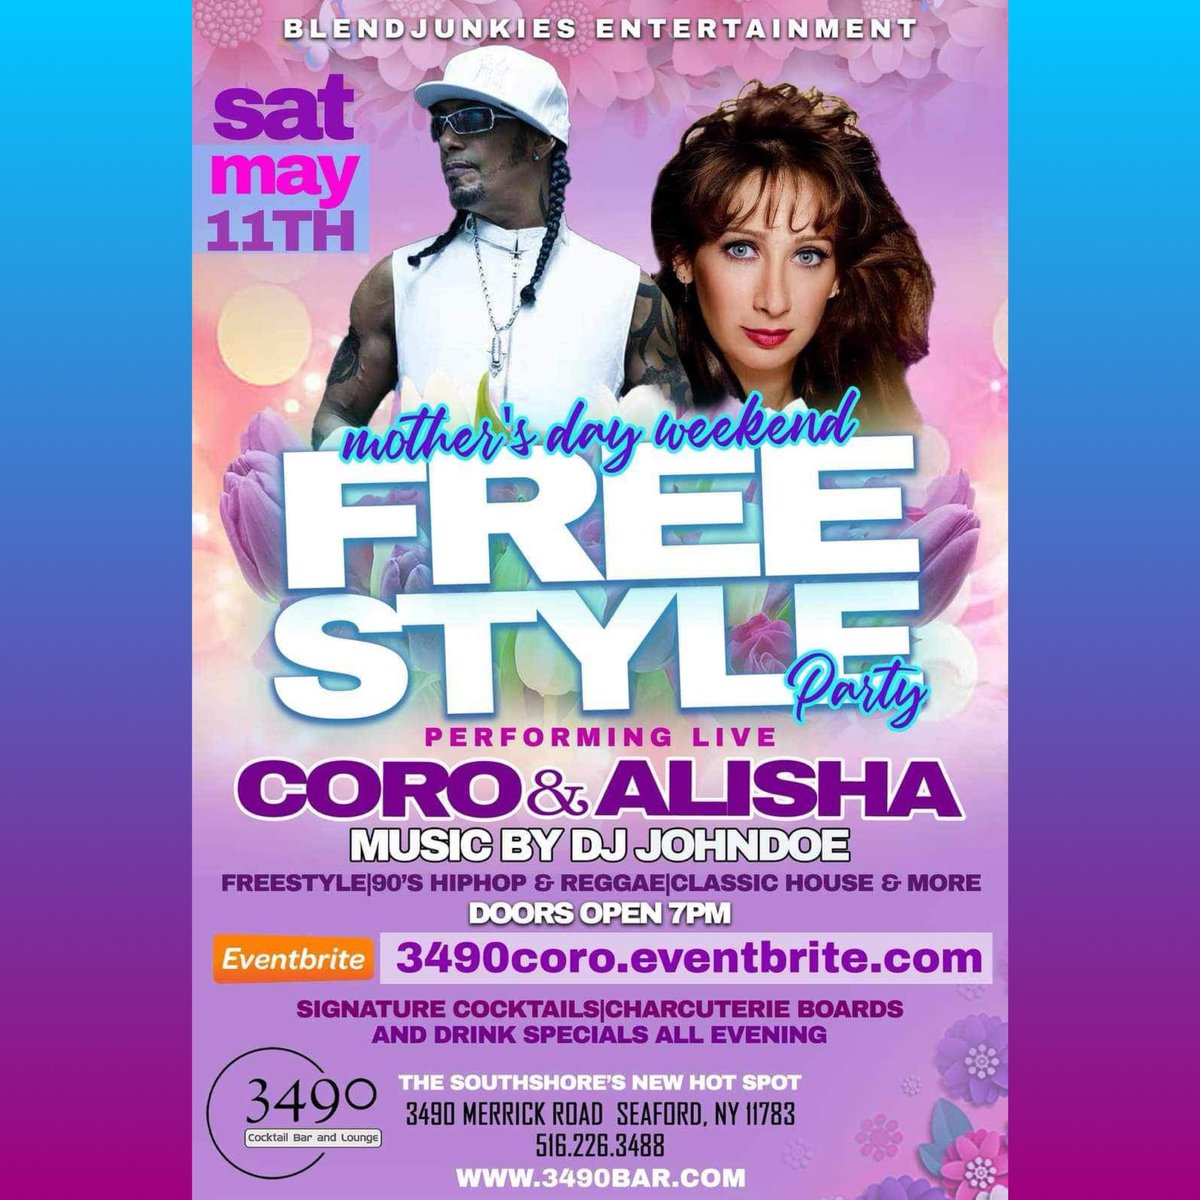 3490coro.eventbrite.com
Blendjunkies PRESENTS: 
MOTHERS DAY WEEKEND FREESTYLE PARTY 
3490 Cocktail Bar and Lounge 
MAY 11th PERFORMING LIVE: 
CORO  “WHERE ARE YOU TONIGHT” & ALISHA “ALL NIGHT PASSION”Music by : DJ JOHNDOE